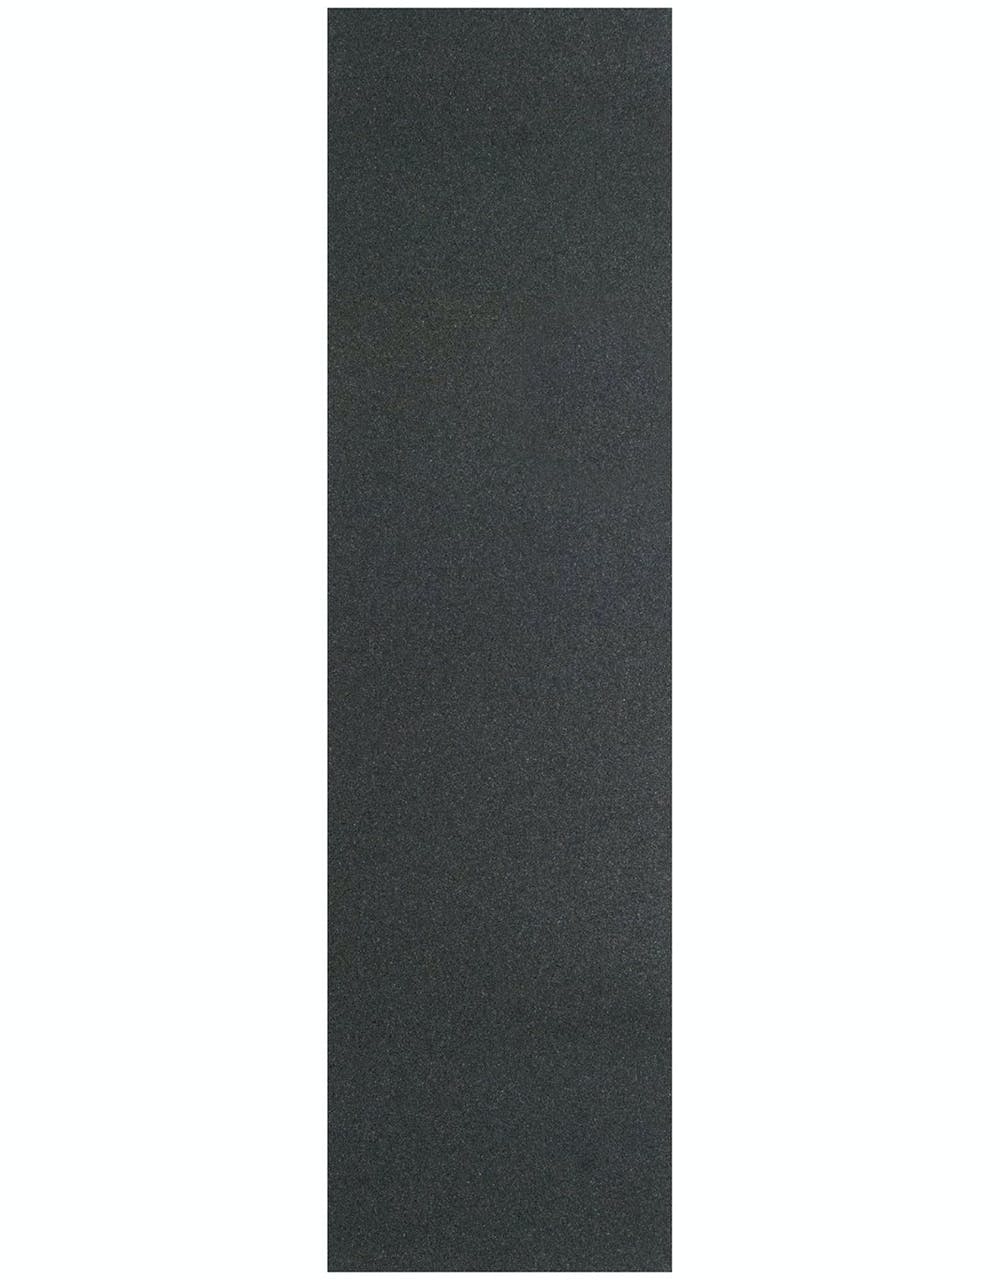 Grizzly Blank 9" Grip Tape Sheet